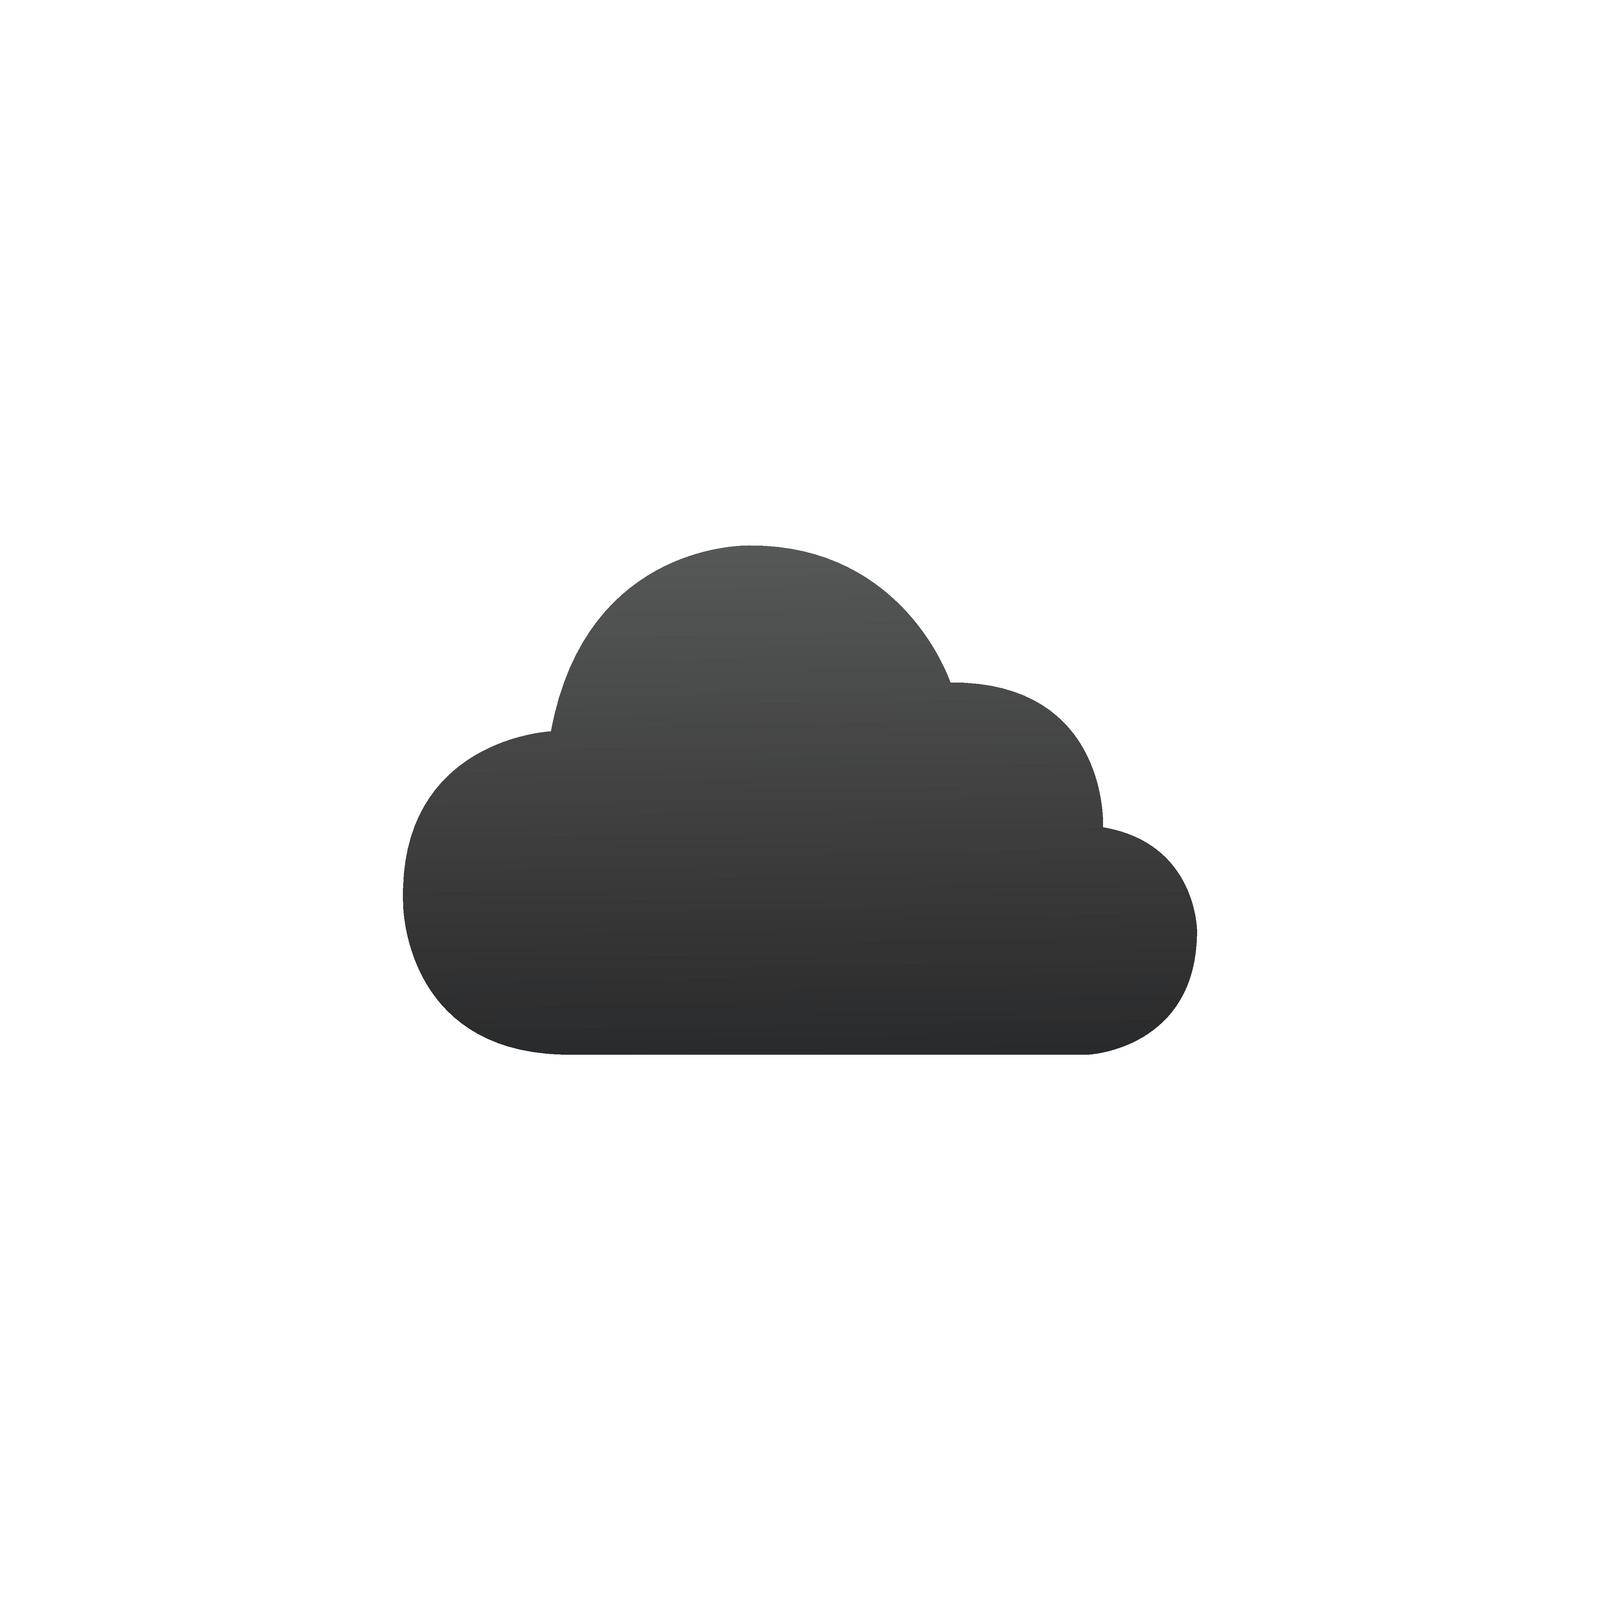 Cloud Icon Vector. Simple flat symbol. Perfect Black pictogram illustration on white background. by Kyrylov